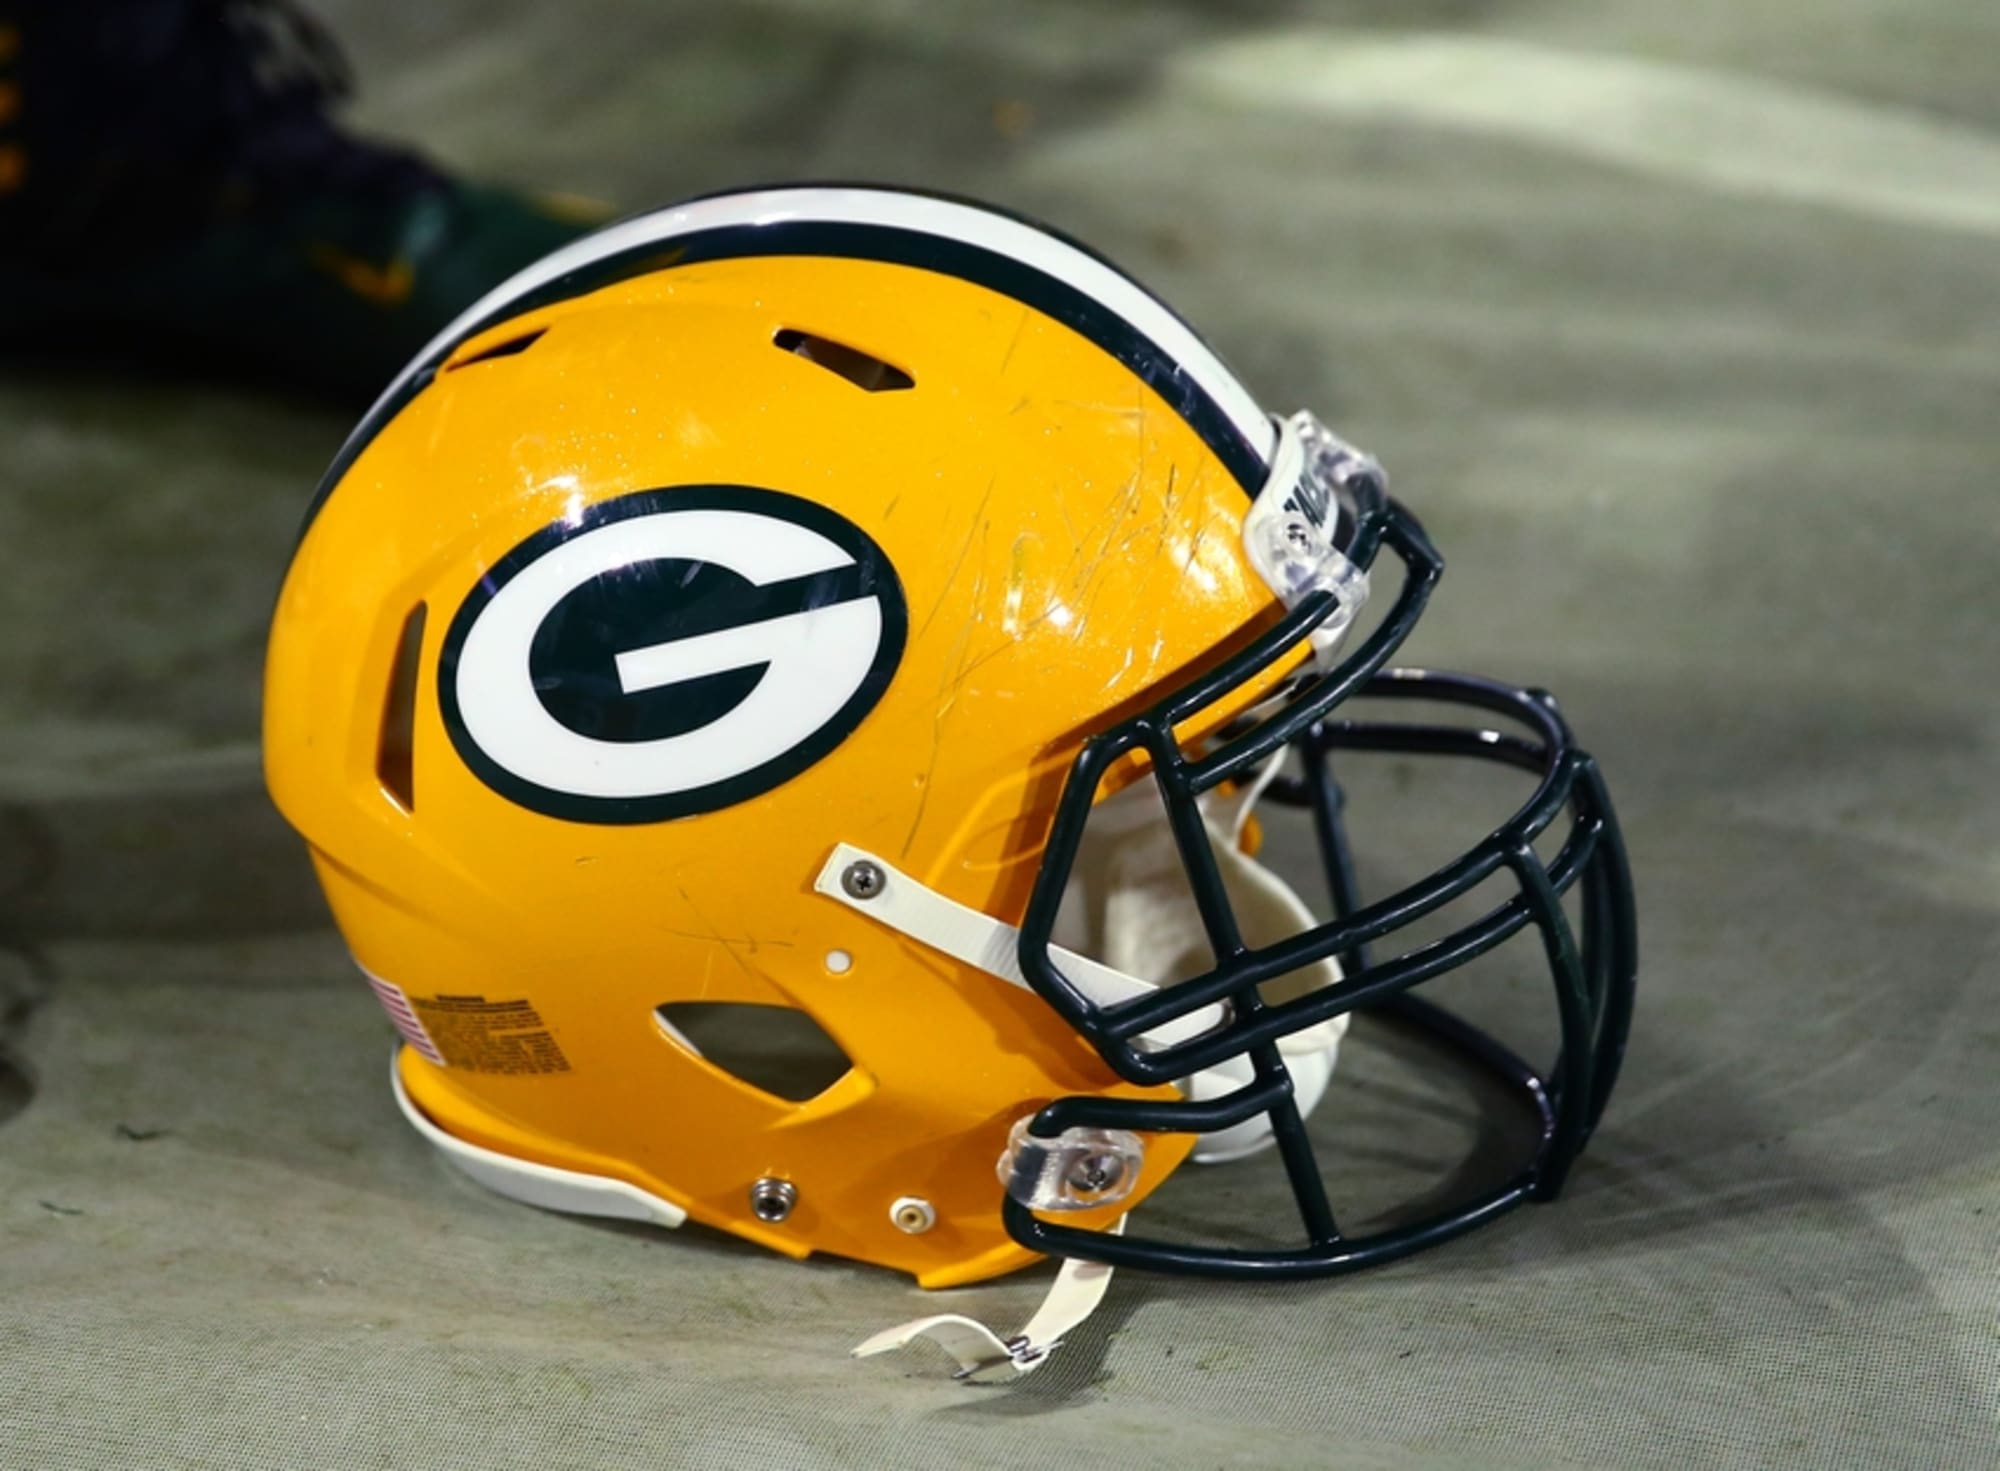 Green Bay Packers: Fuzzy Thurston wore #63 best